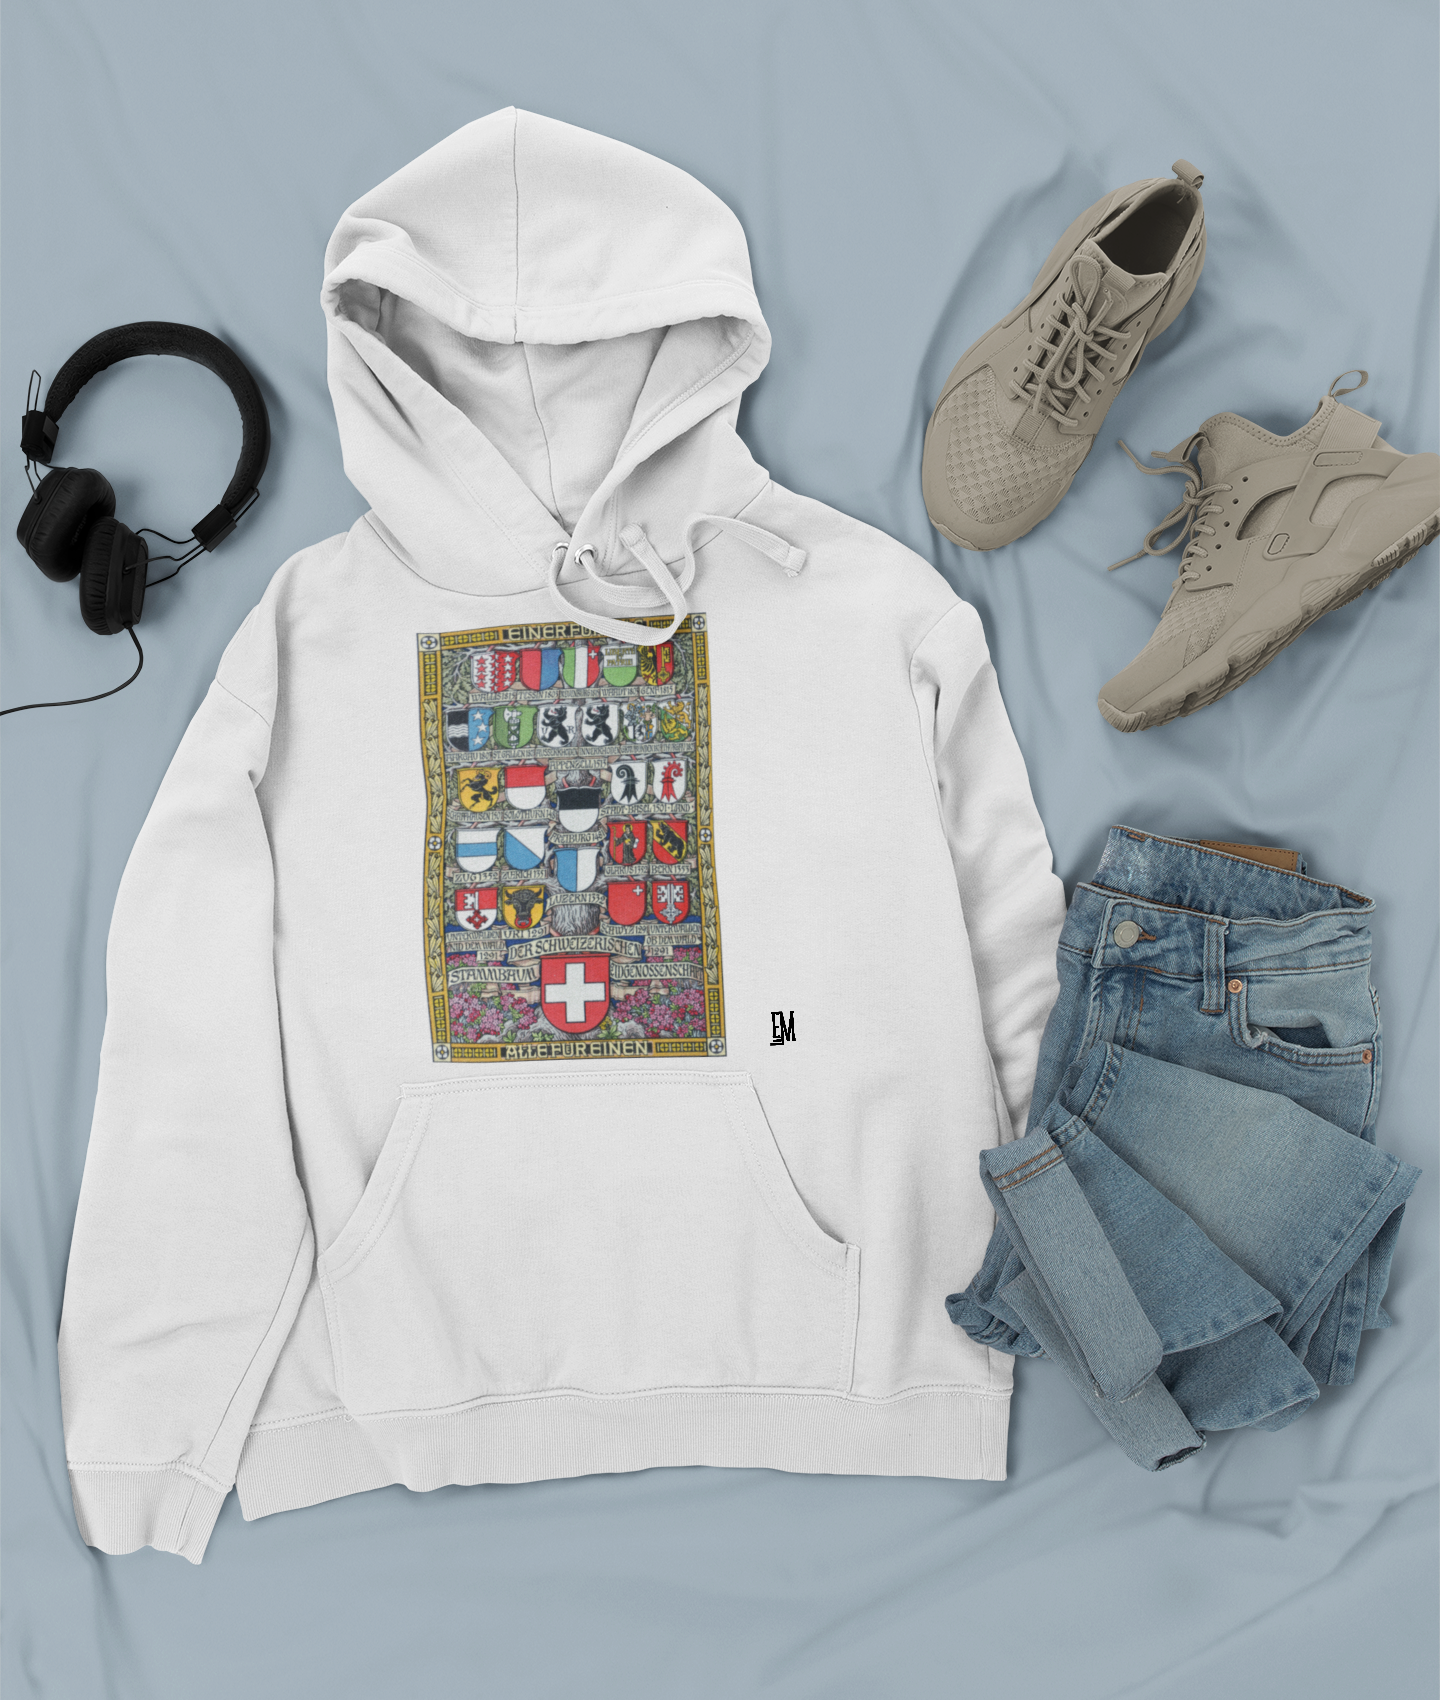 outfit-mockup-featuring-a-pullover-hoodie-next-to-trendy-sneakers-and-jeans-26334.png